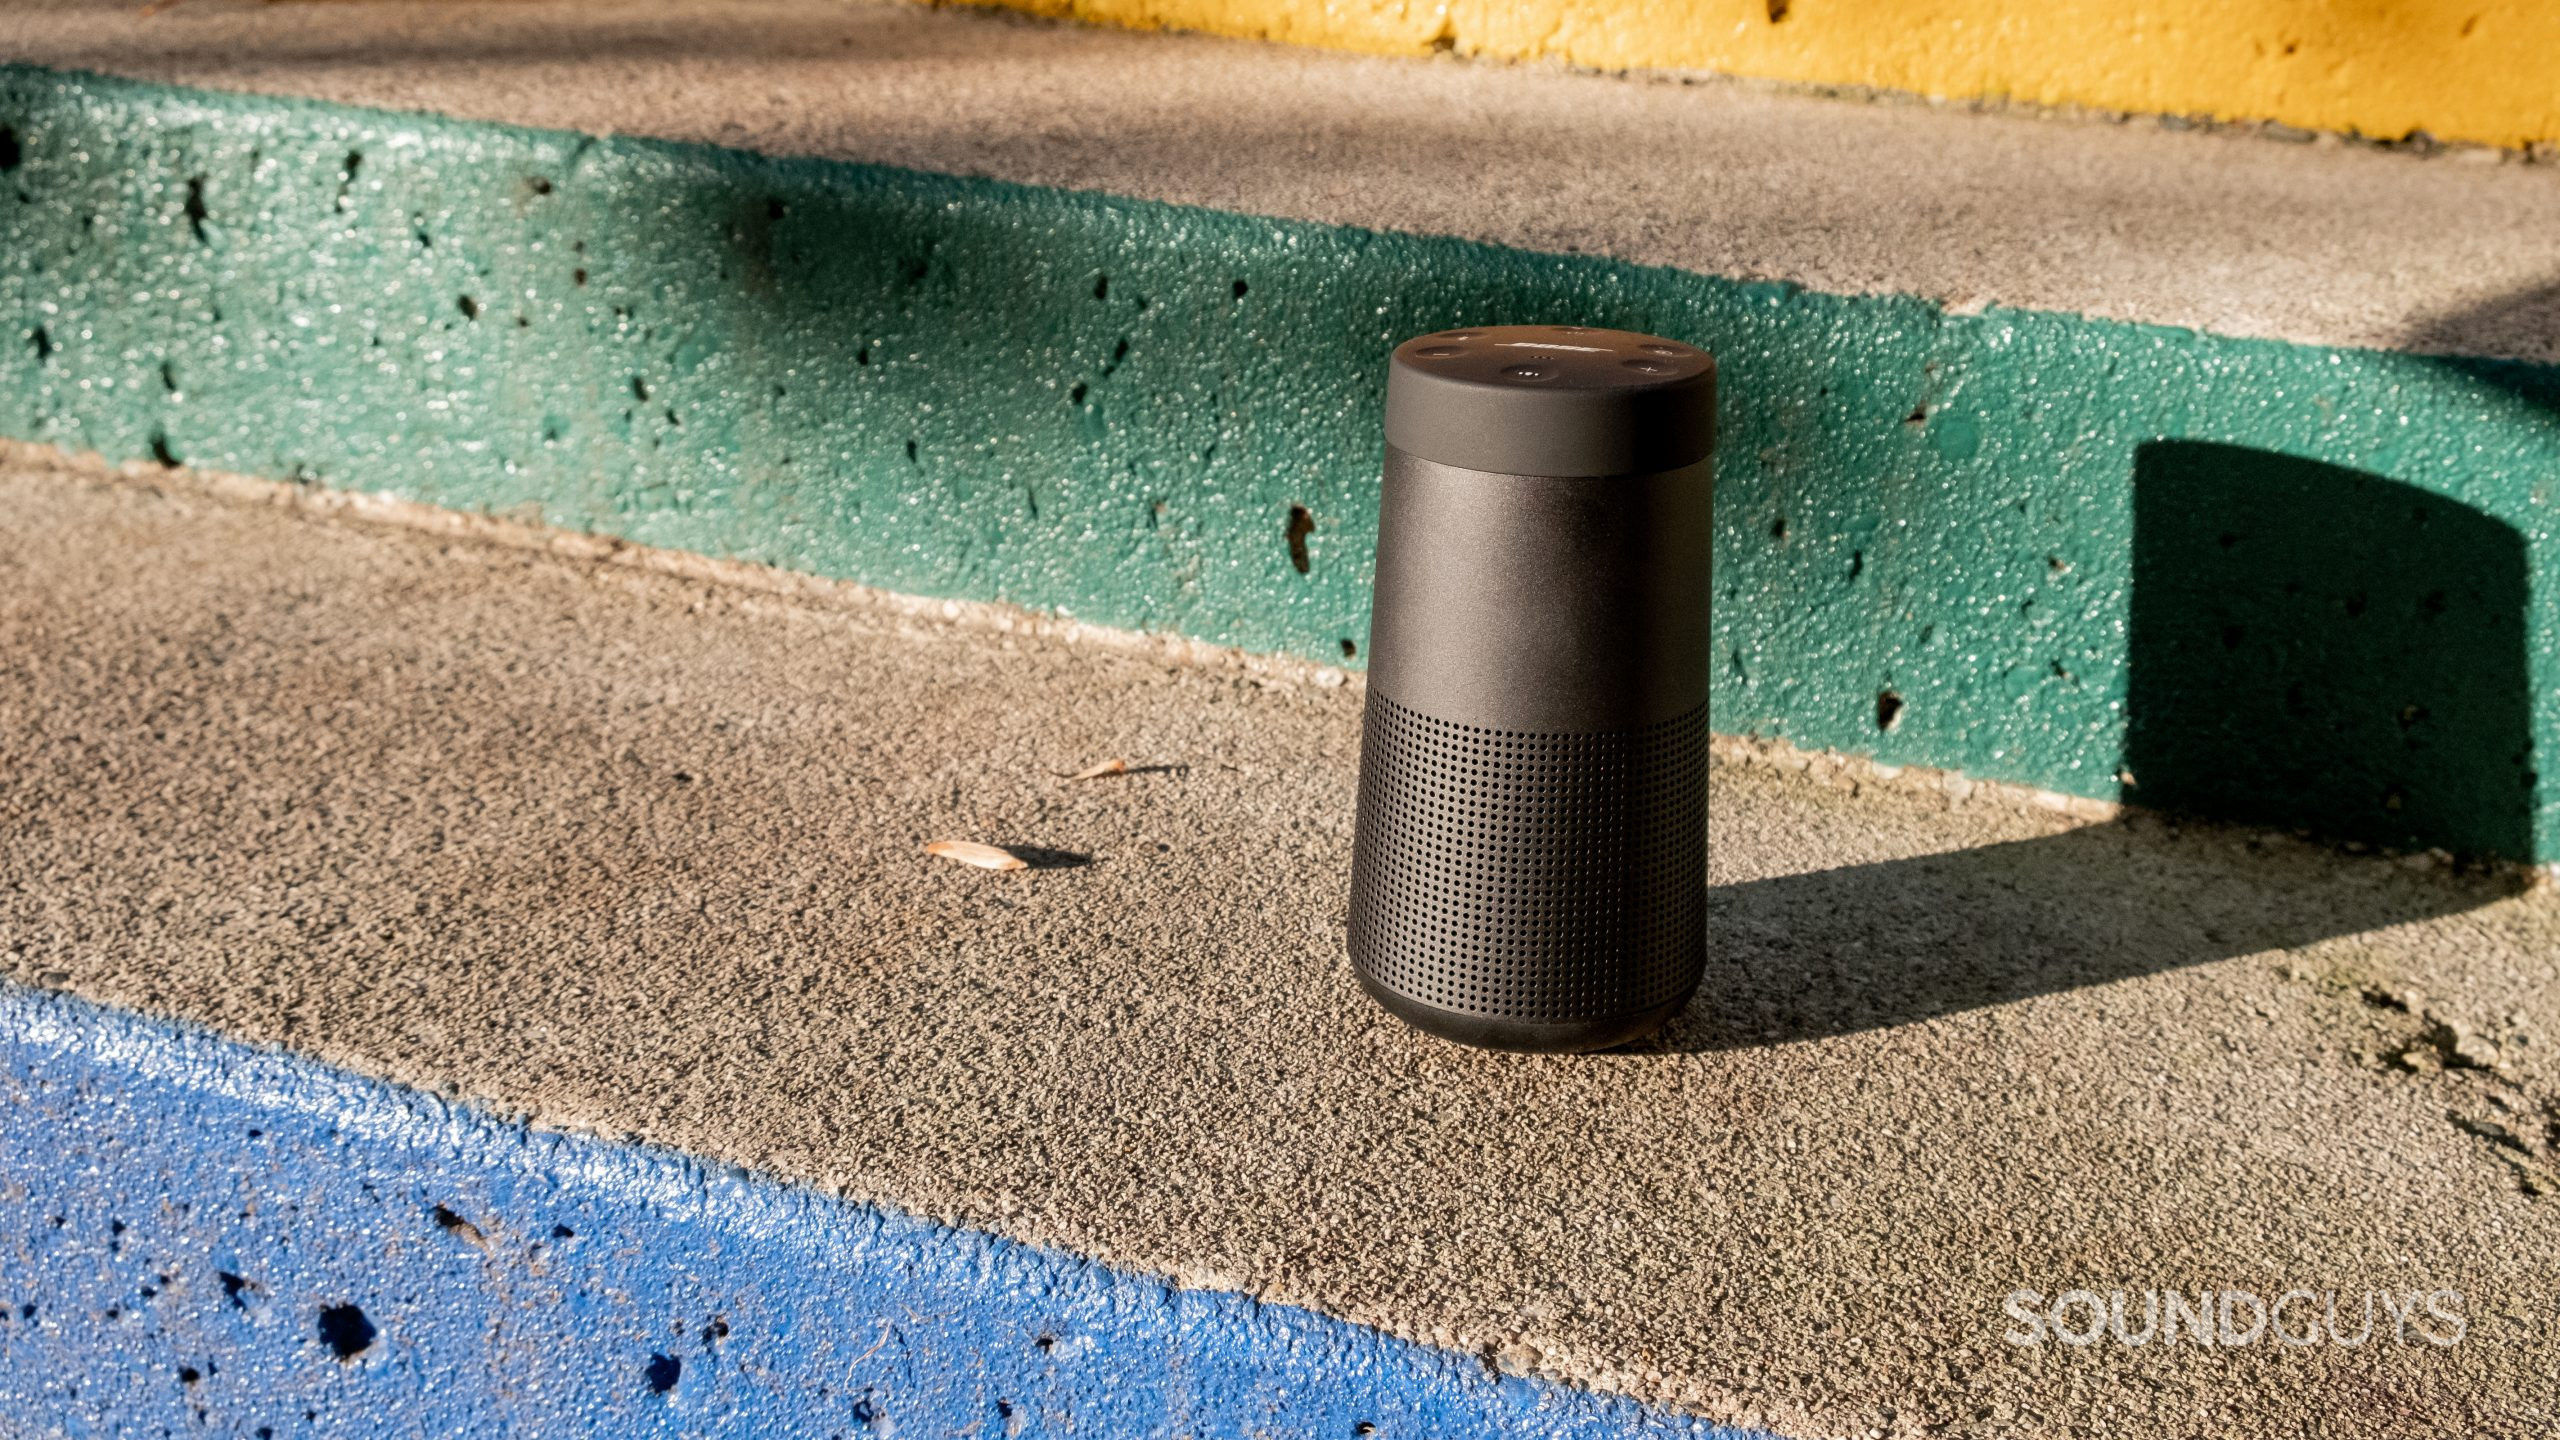 The Bose SoundLink Revolve II sits on a concrete stair with the concrete stairs painted yellow, green, and blue.